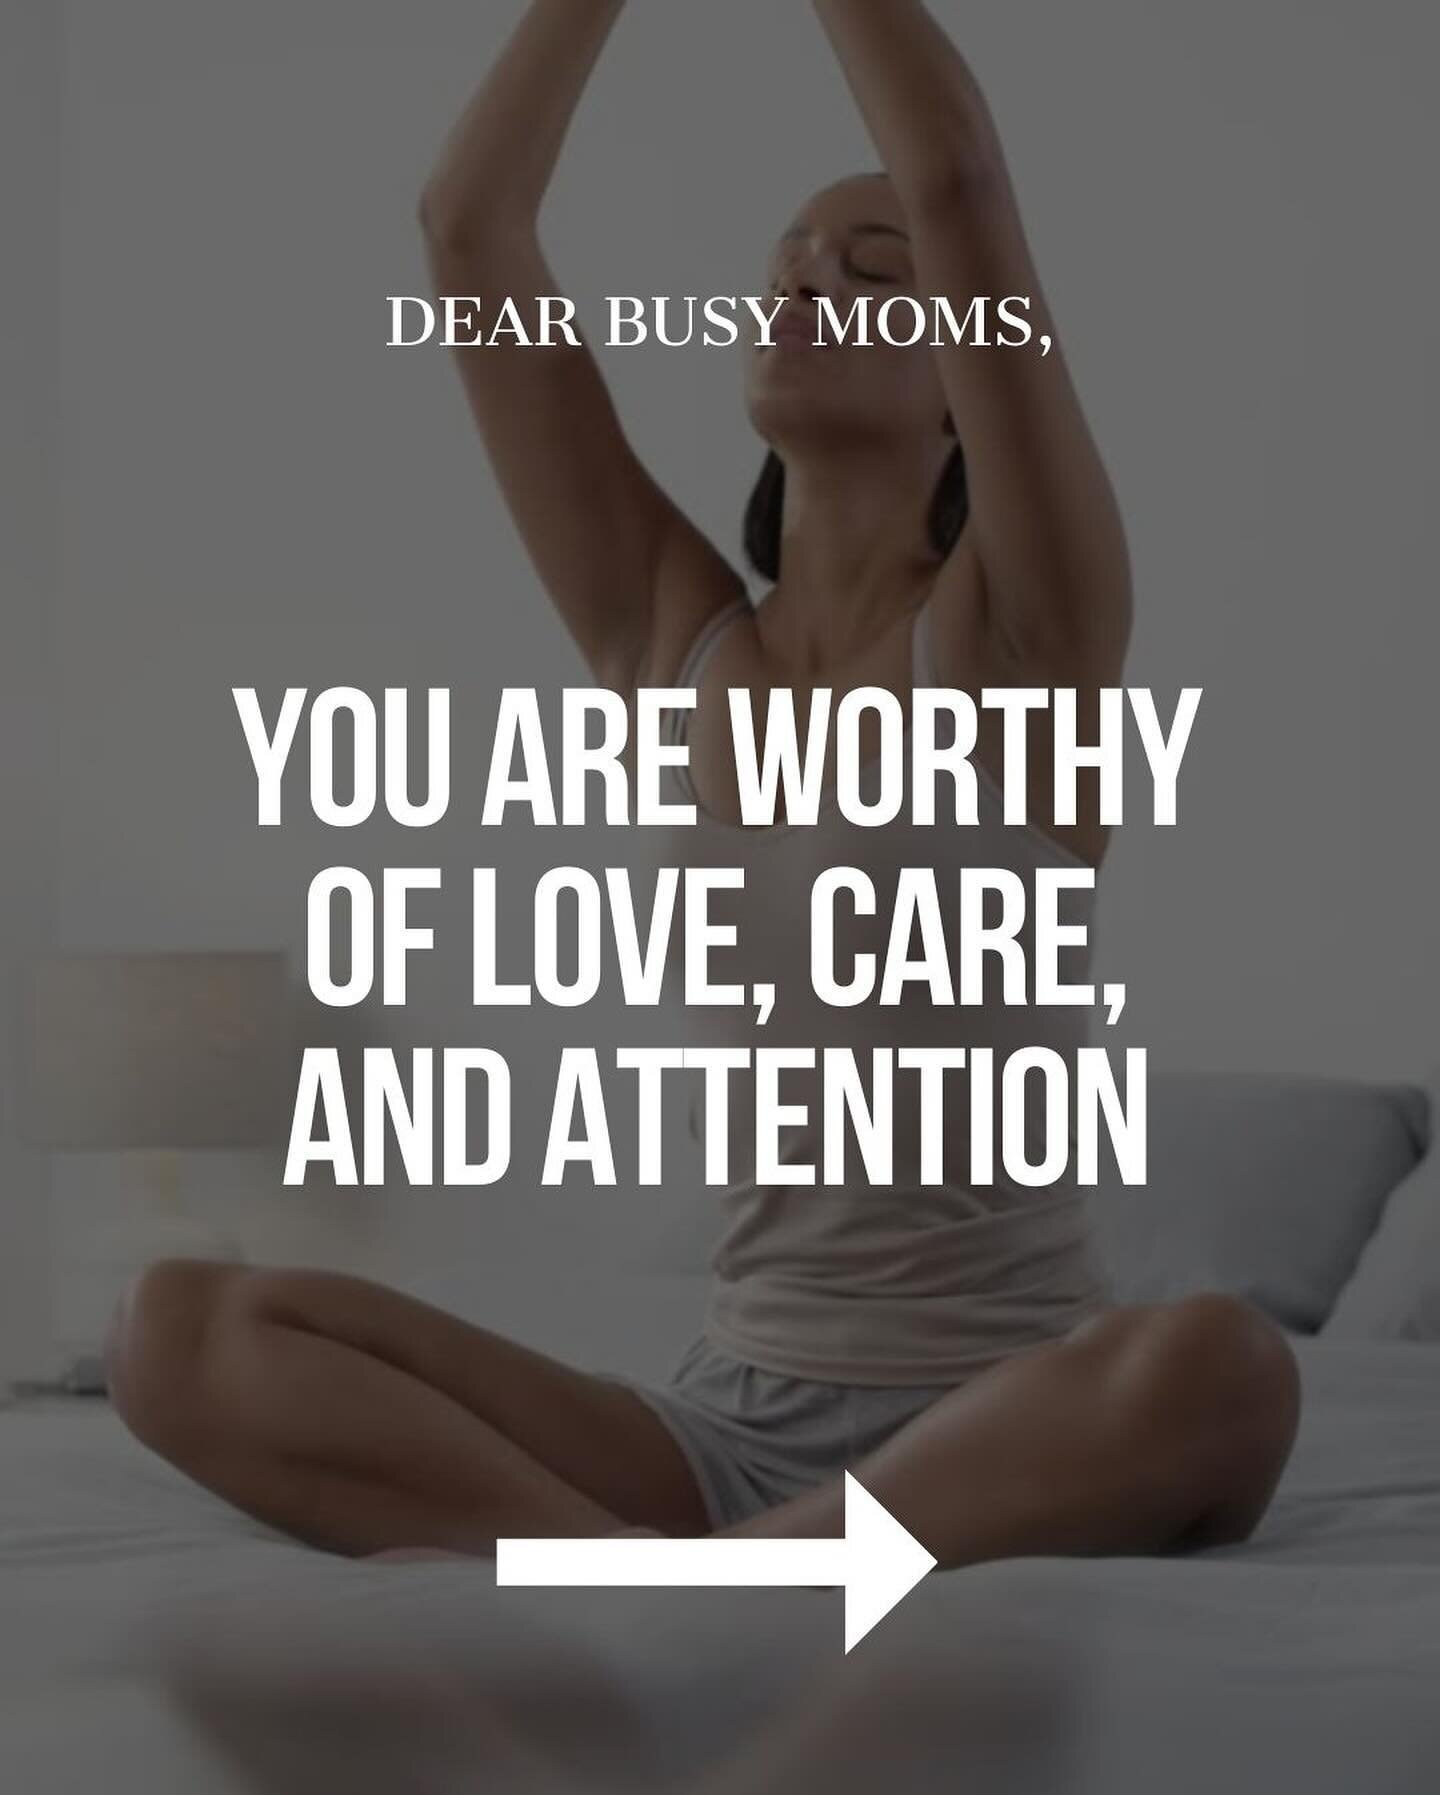 Dear busy mom, you are worthy of love, care, and attention. Those are real goals and desires you have! You deserve to honour them! Here&rsquo;s how 👇
🫶release perfectionism
🫶lead by example
🫶practice self-compassion
YOU are worthy!
#momnutritioni